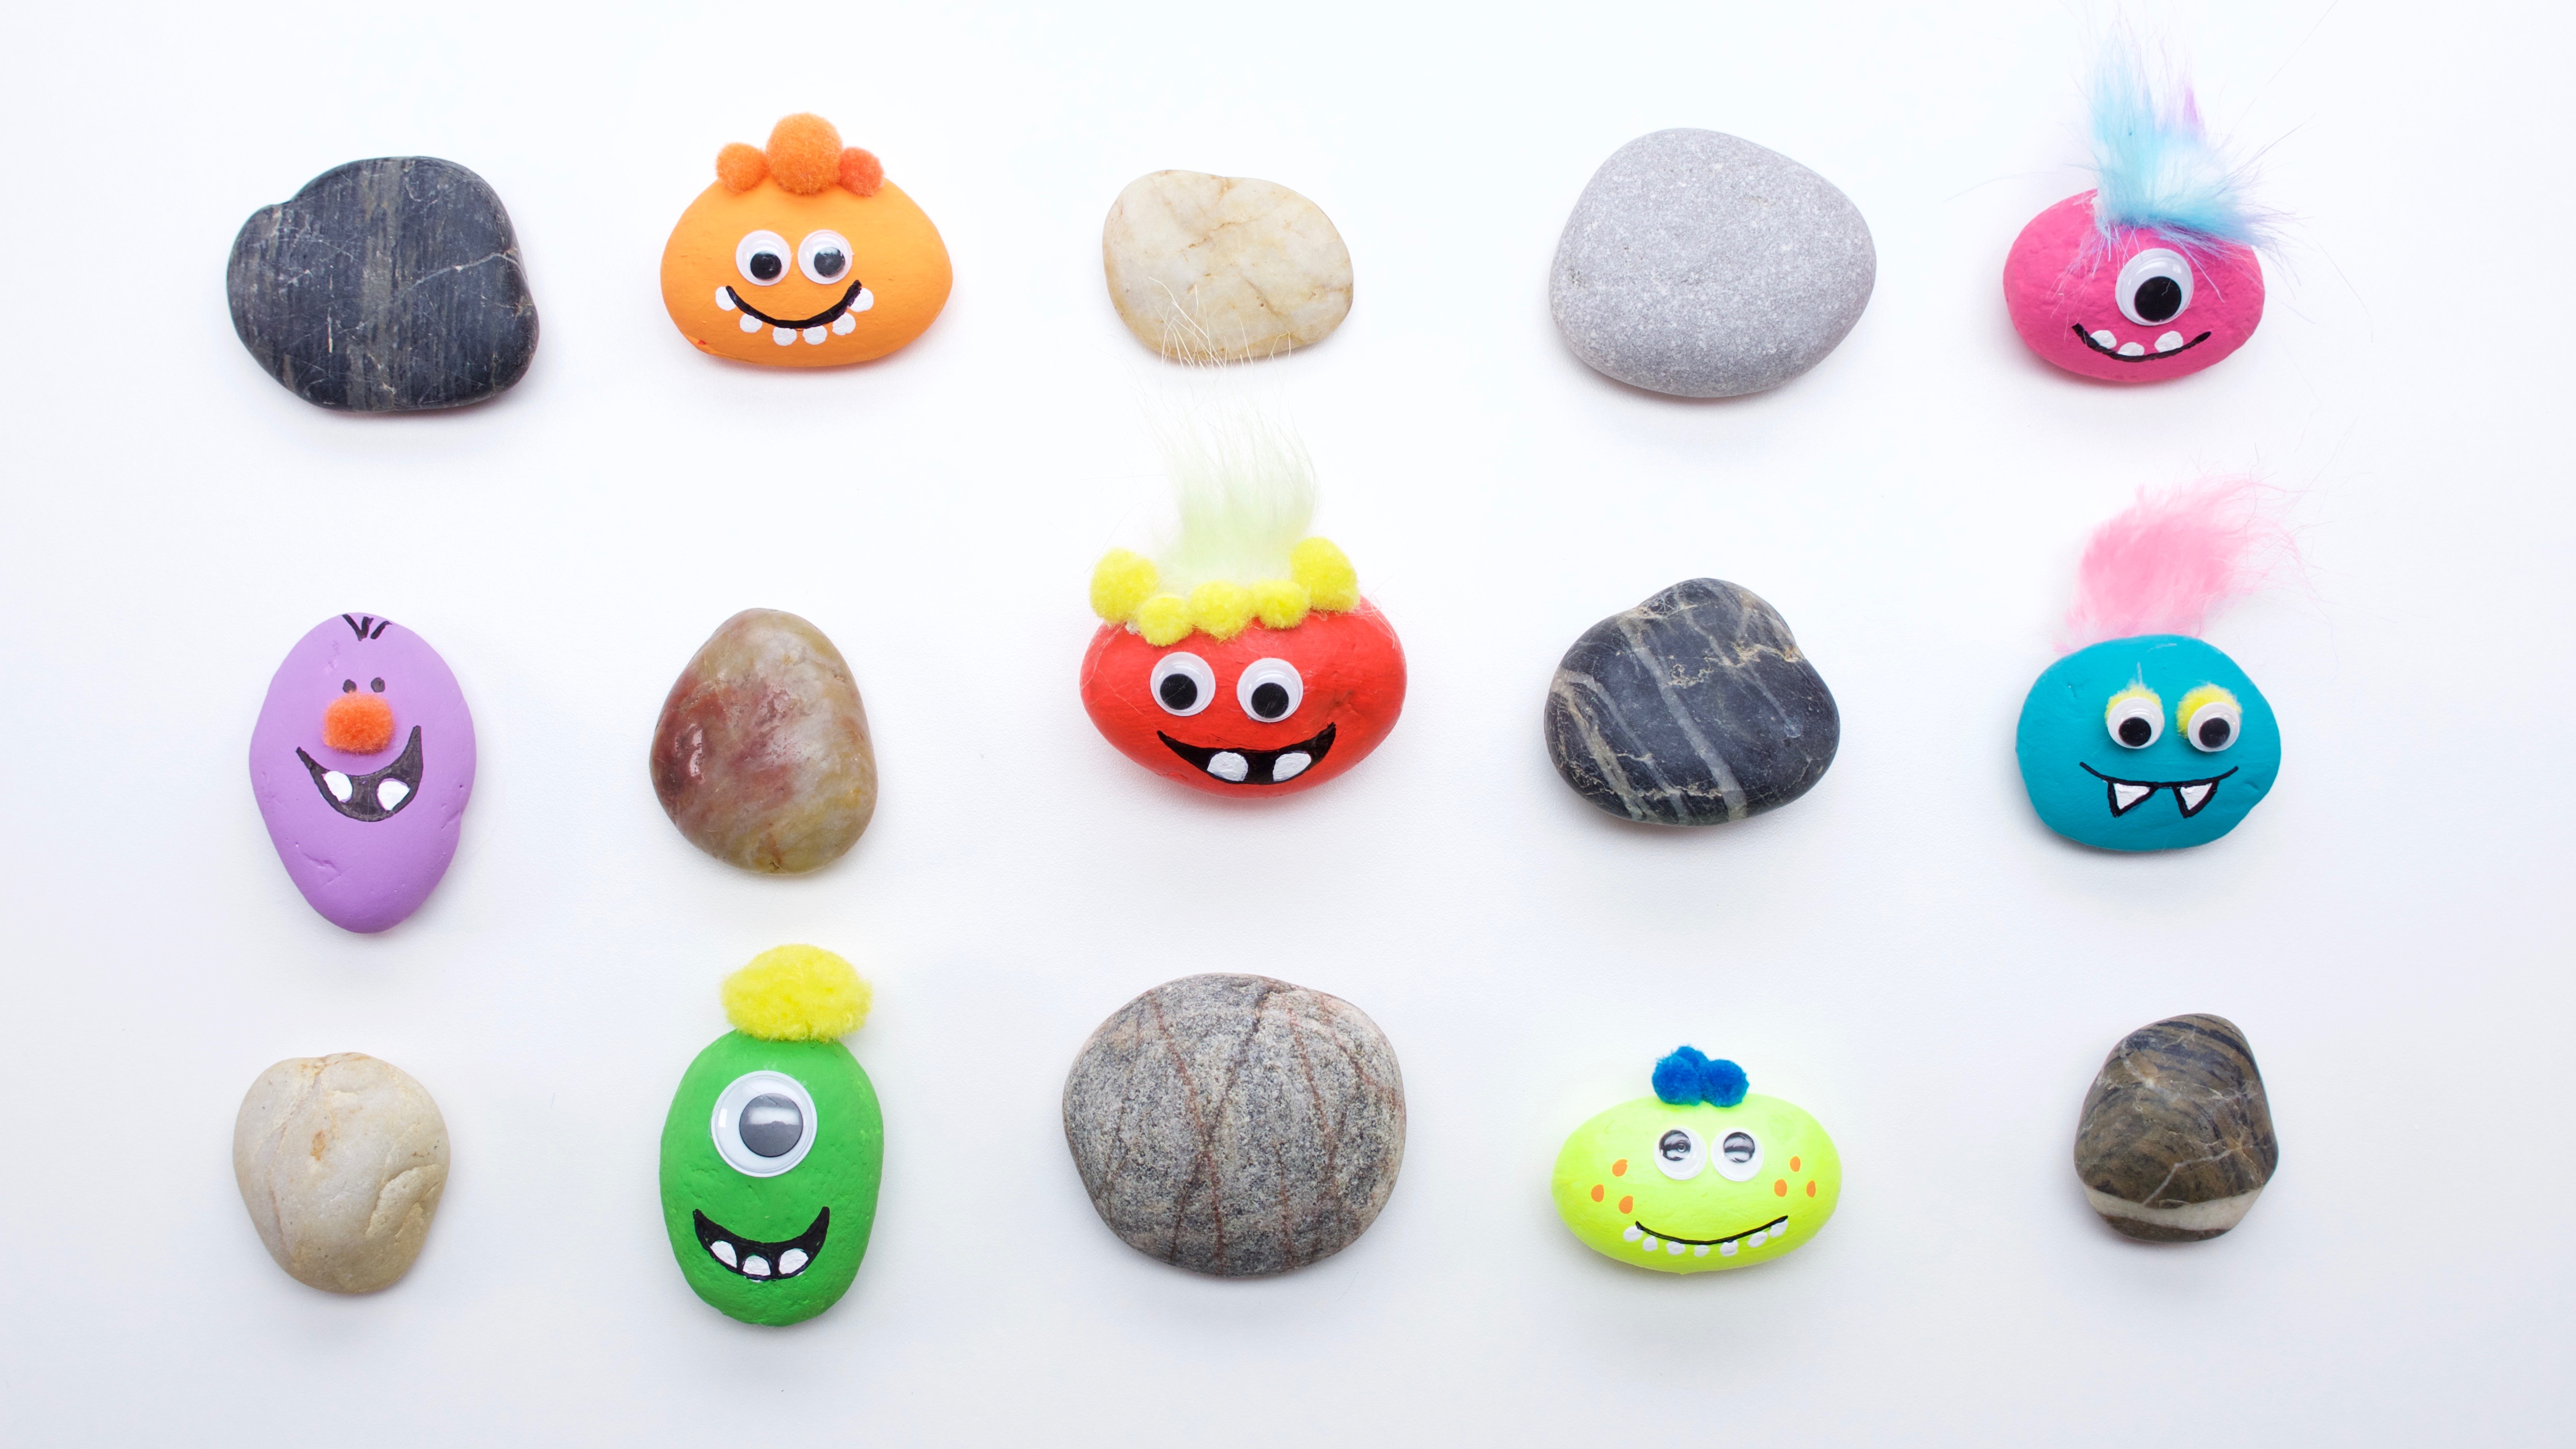 Several small stones painted in different colors, with funny faces on them, sit in rows against a white background.